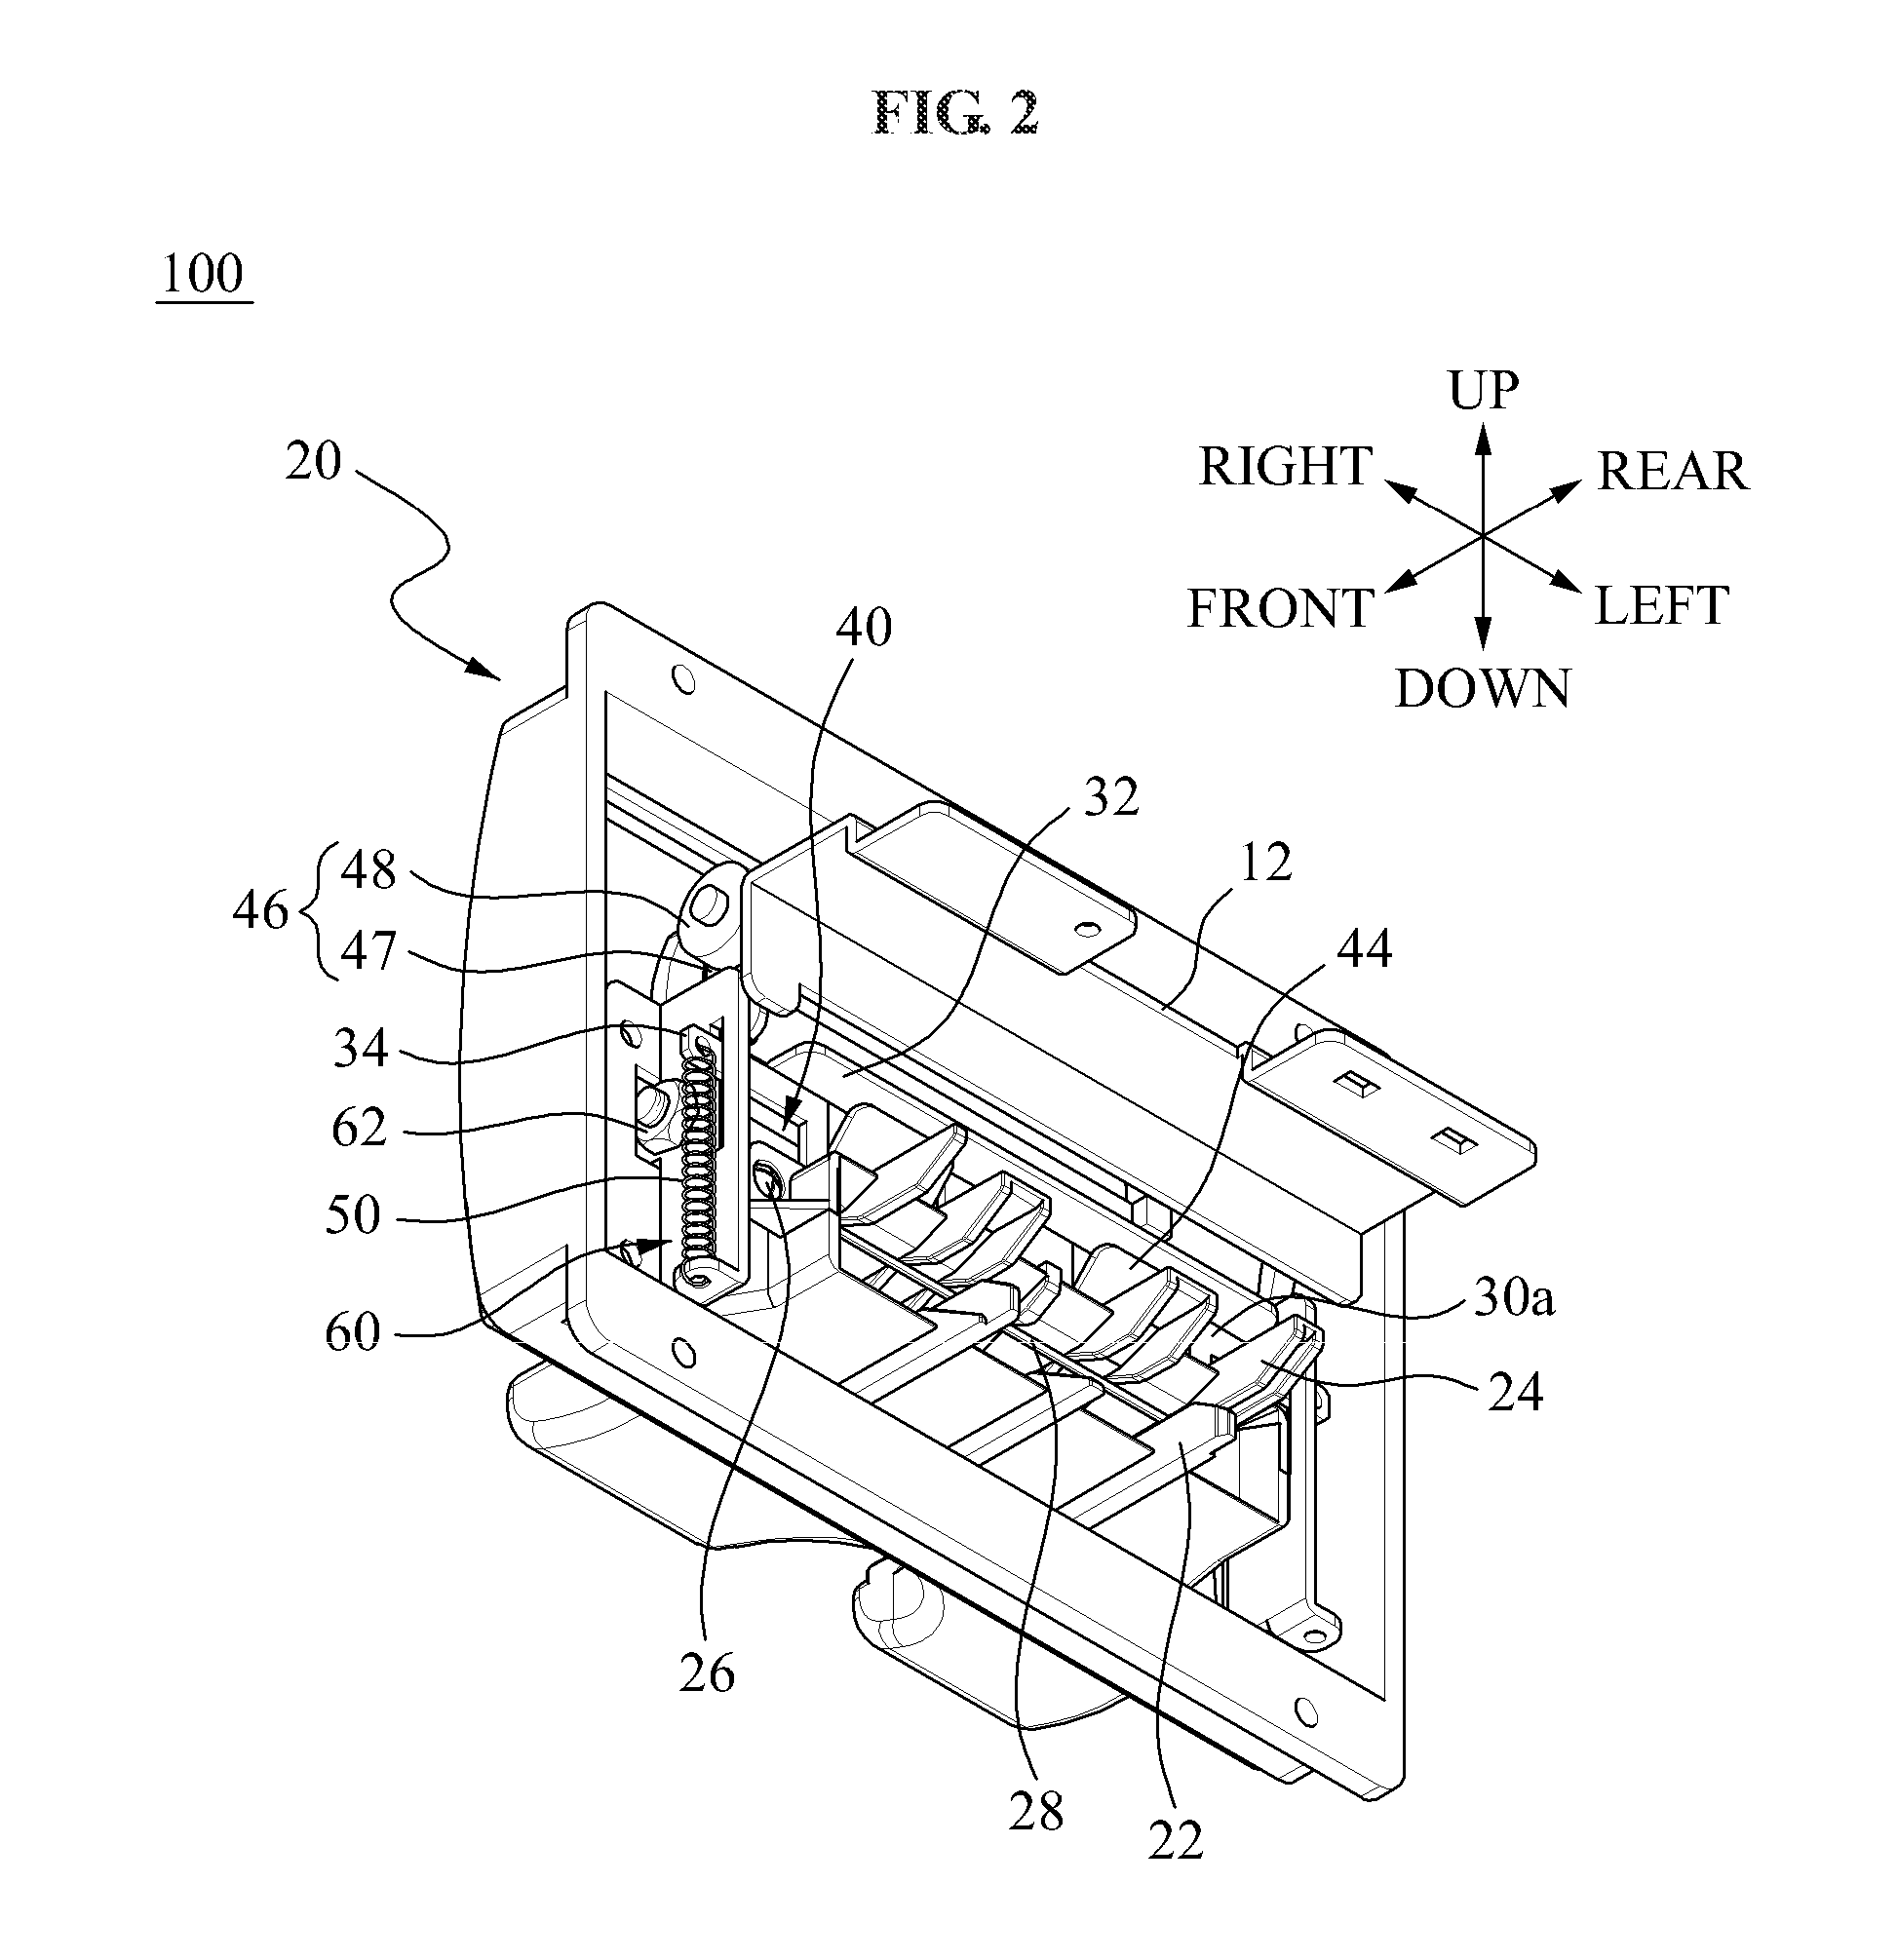 Apparatus for Opening and Closing the Shield Plate of Automated Teller Machine